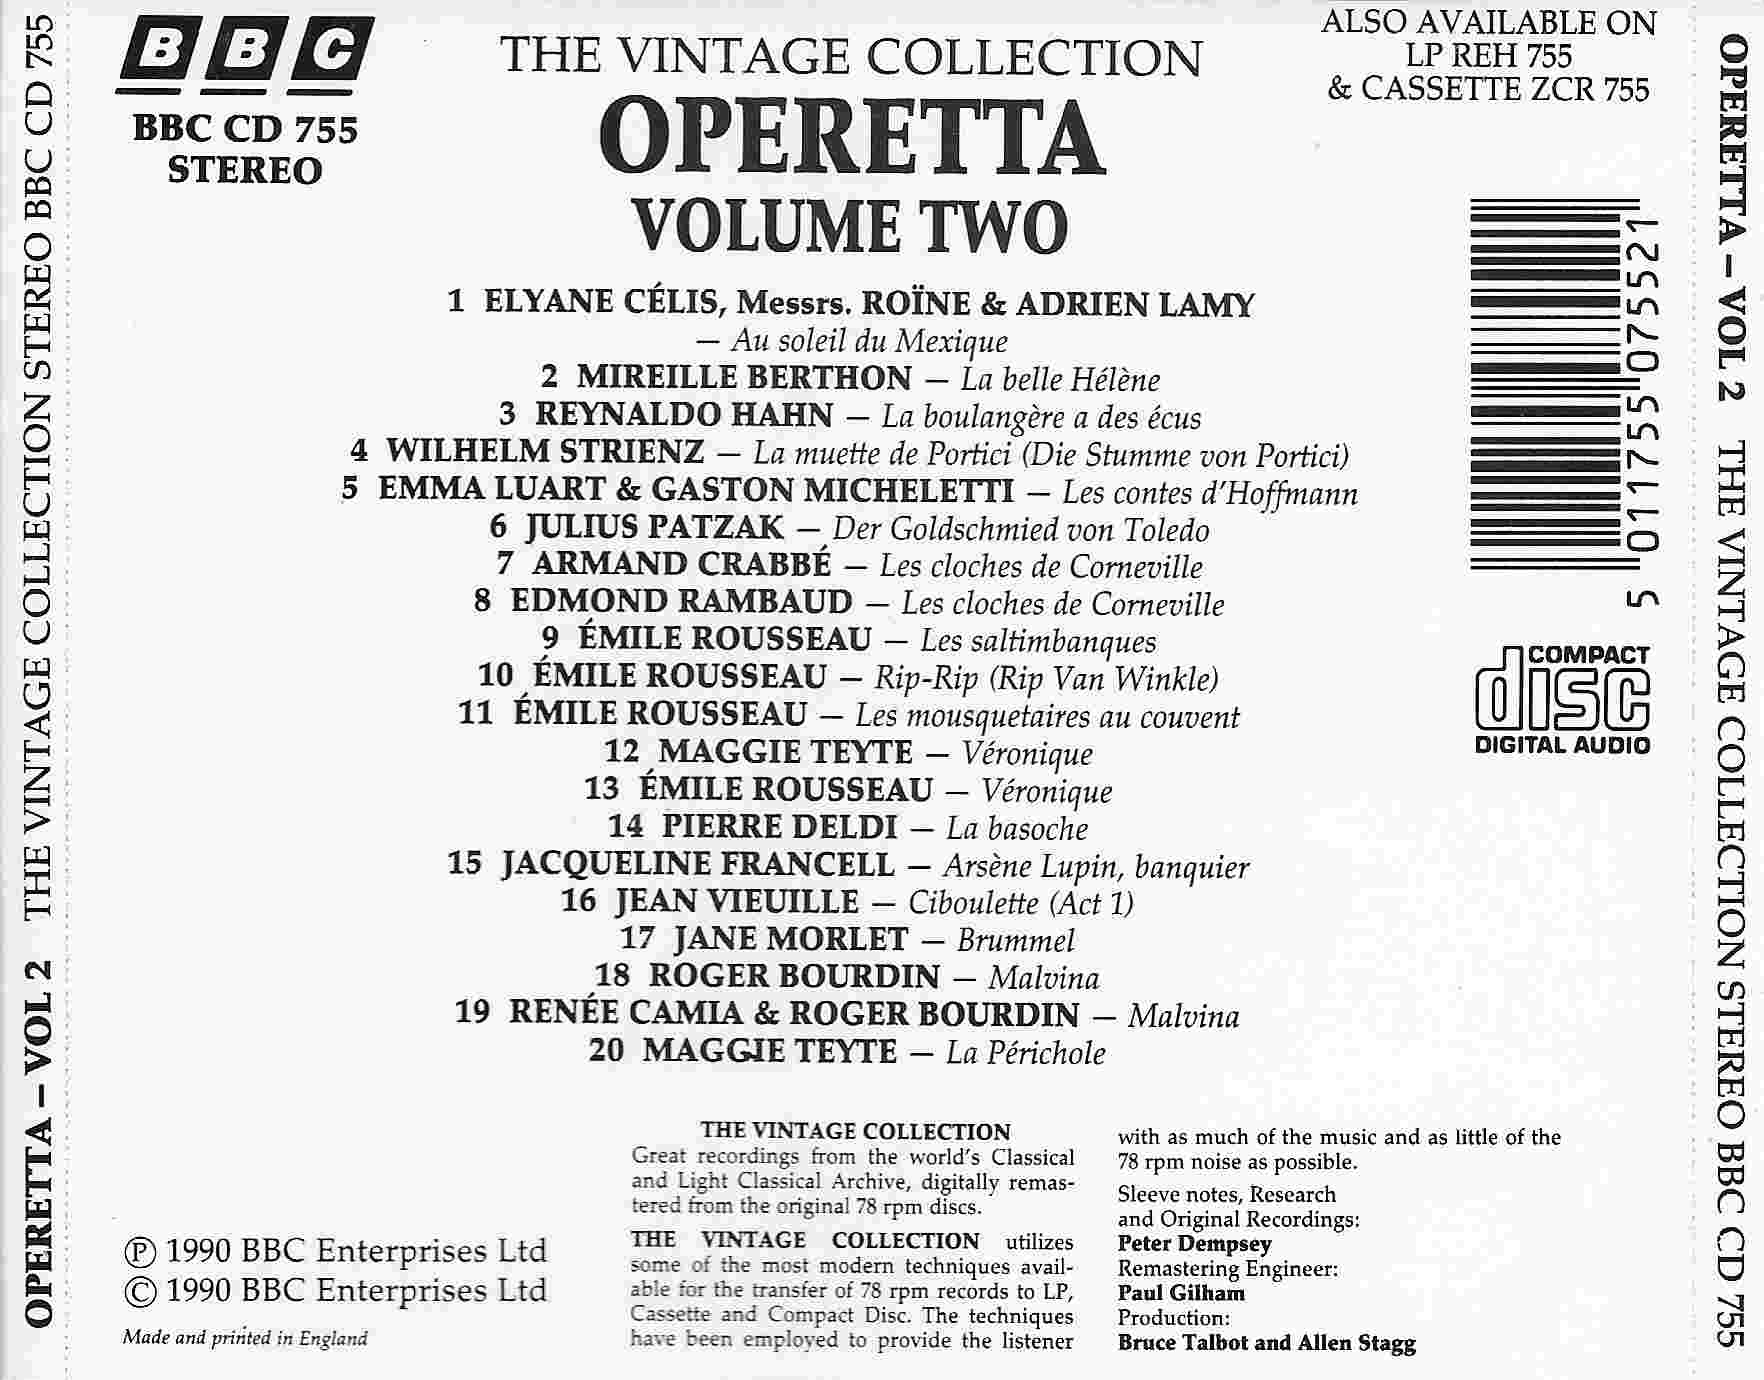 Picture of BBCCD755 The vintage collection - Operetta volume 2 by artist Various from the BBC records and Tapes library